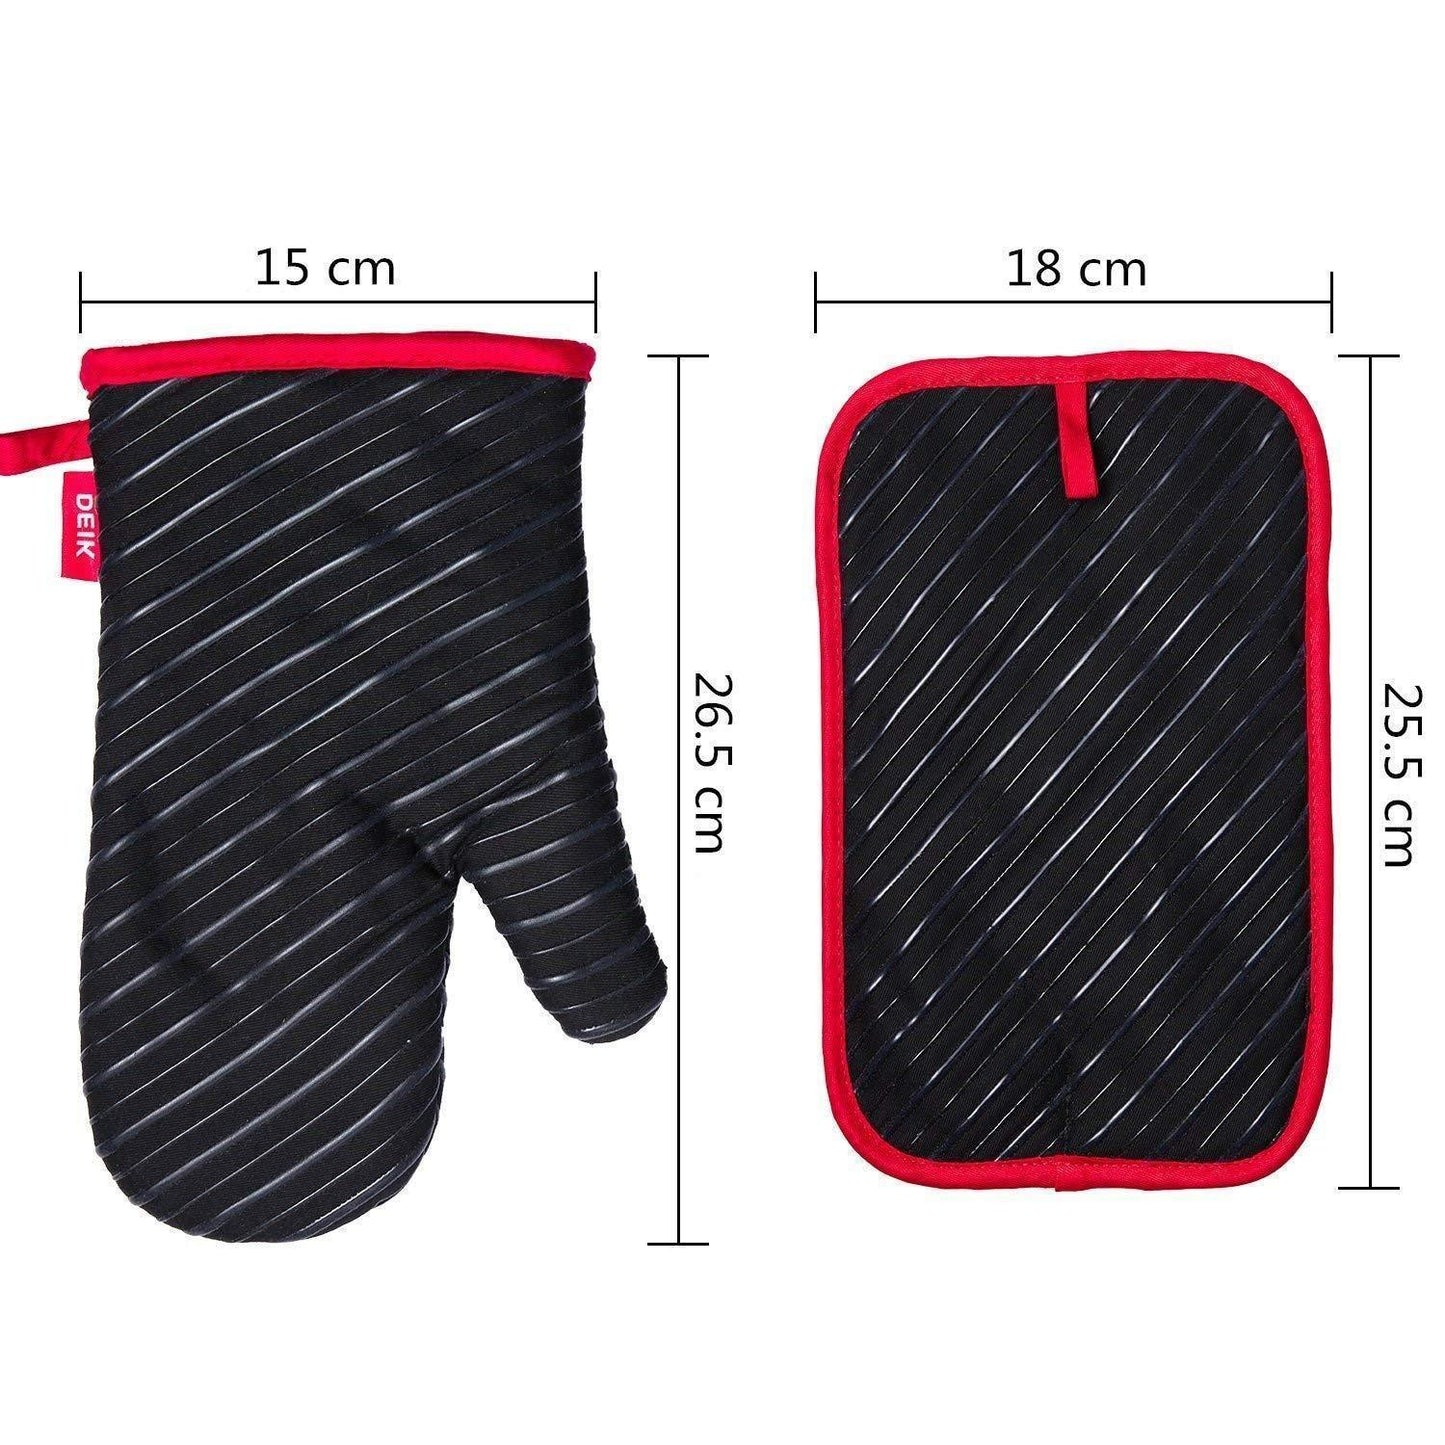 Featured deik oven mitts and potholders 4 piece sets for kitchen counter safe mats and advanced heat resistant oven mitt non slip textured grip pot holders nano technology